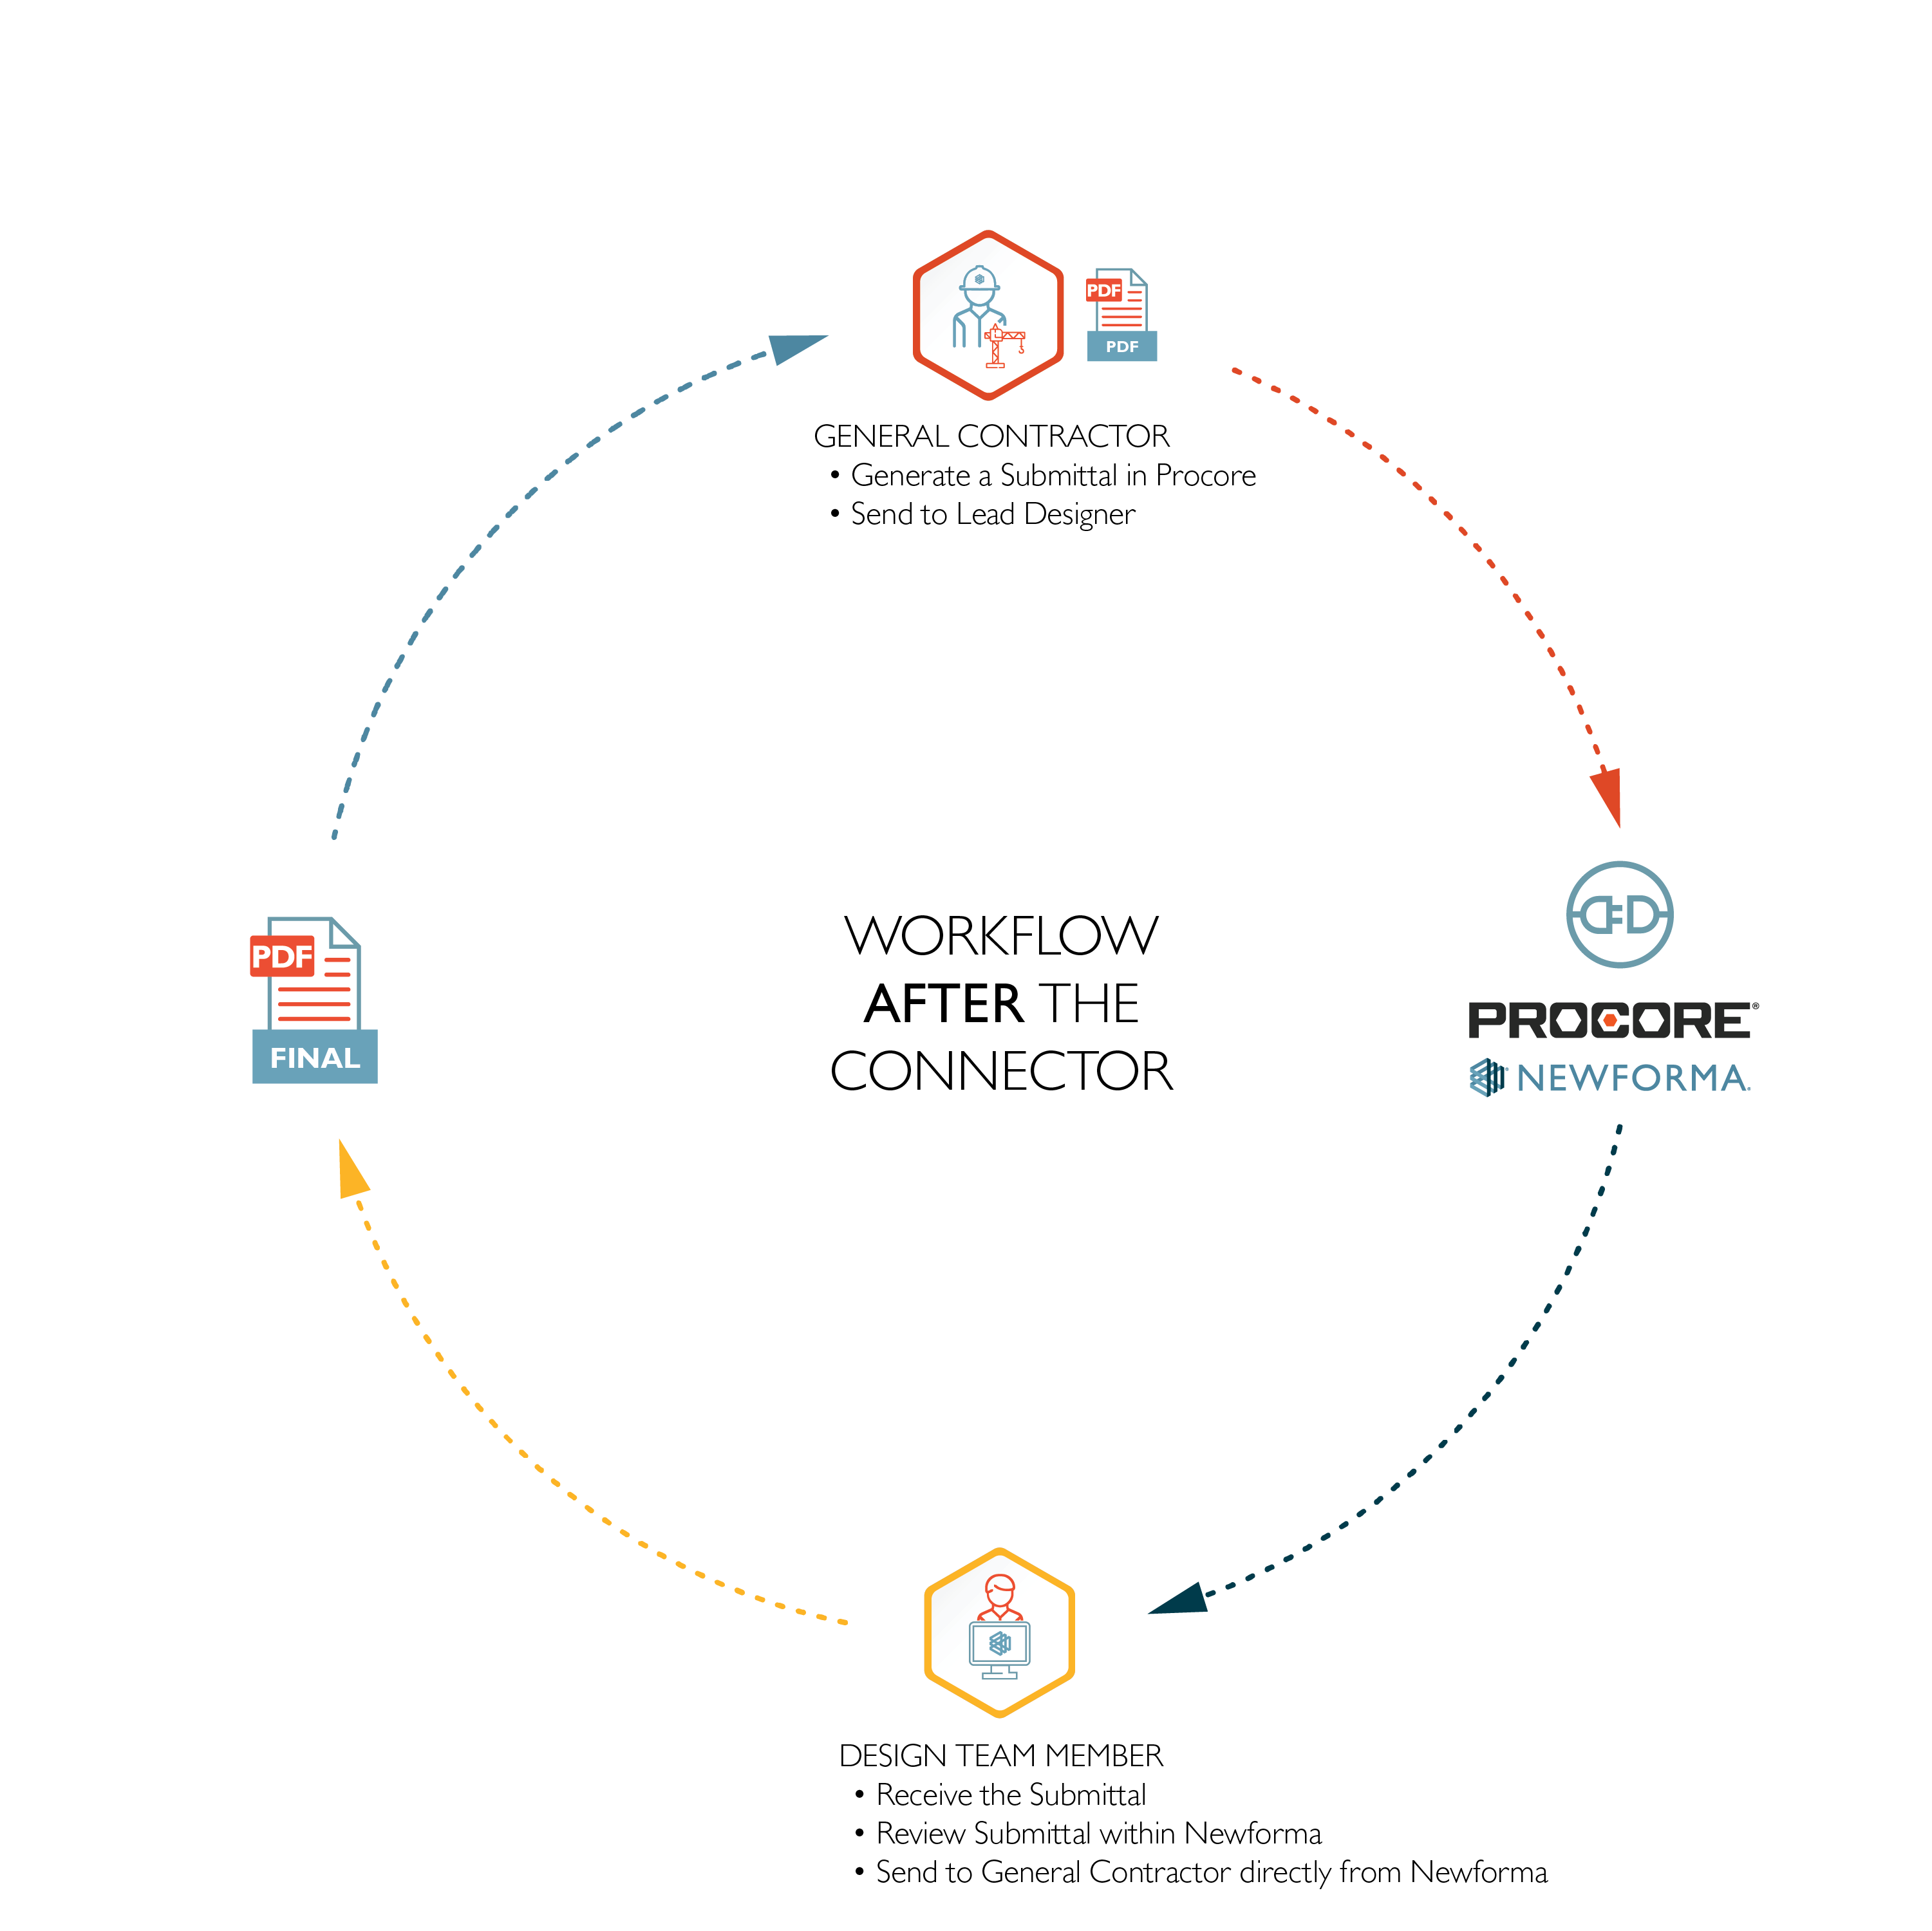 Procore after workflow